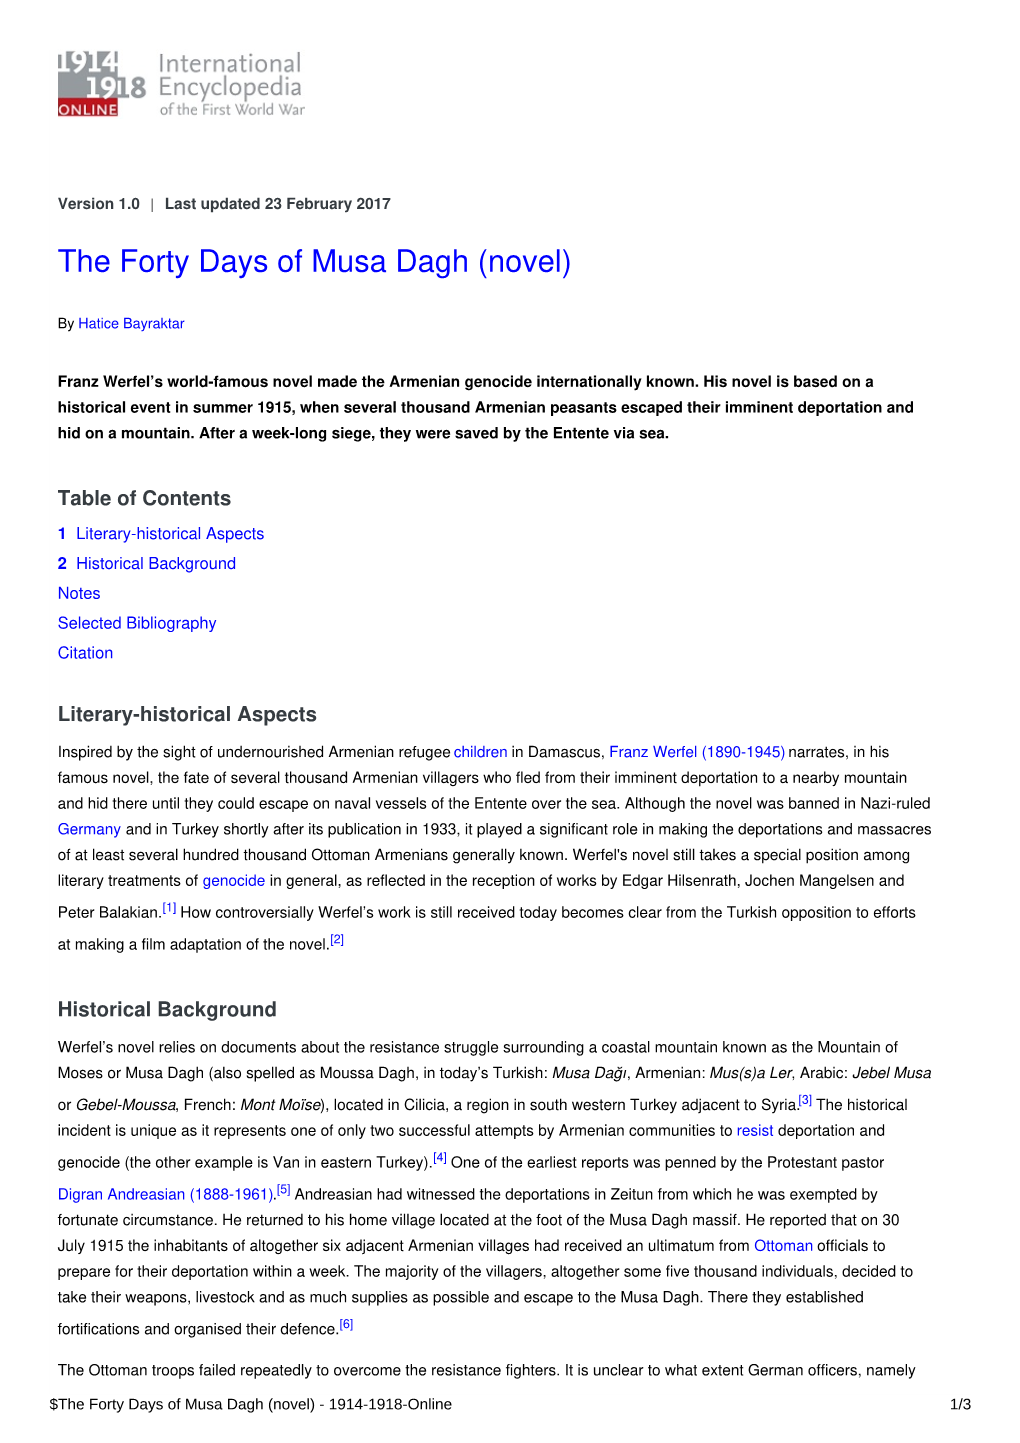 The Forty Days of Musa Dagh (Novel) | International Encyclopedia of The